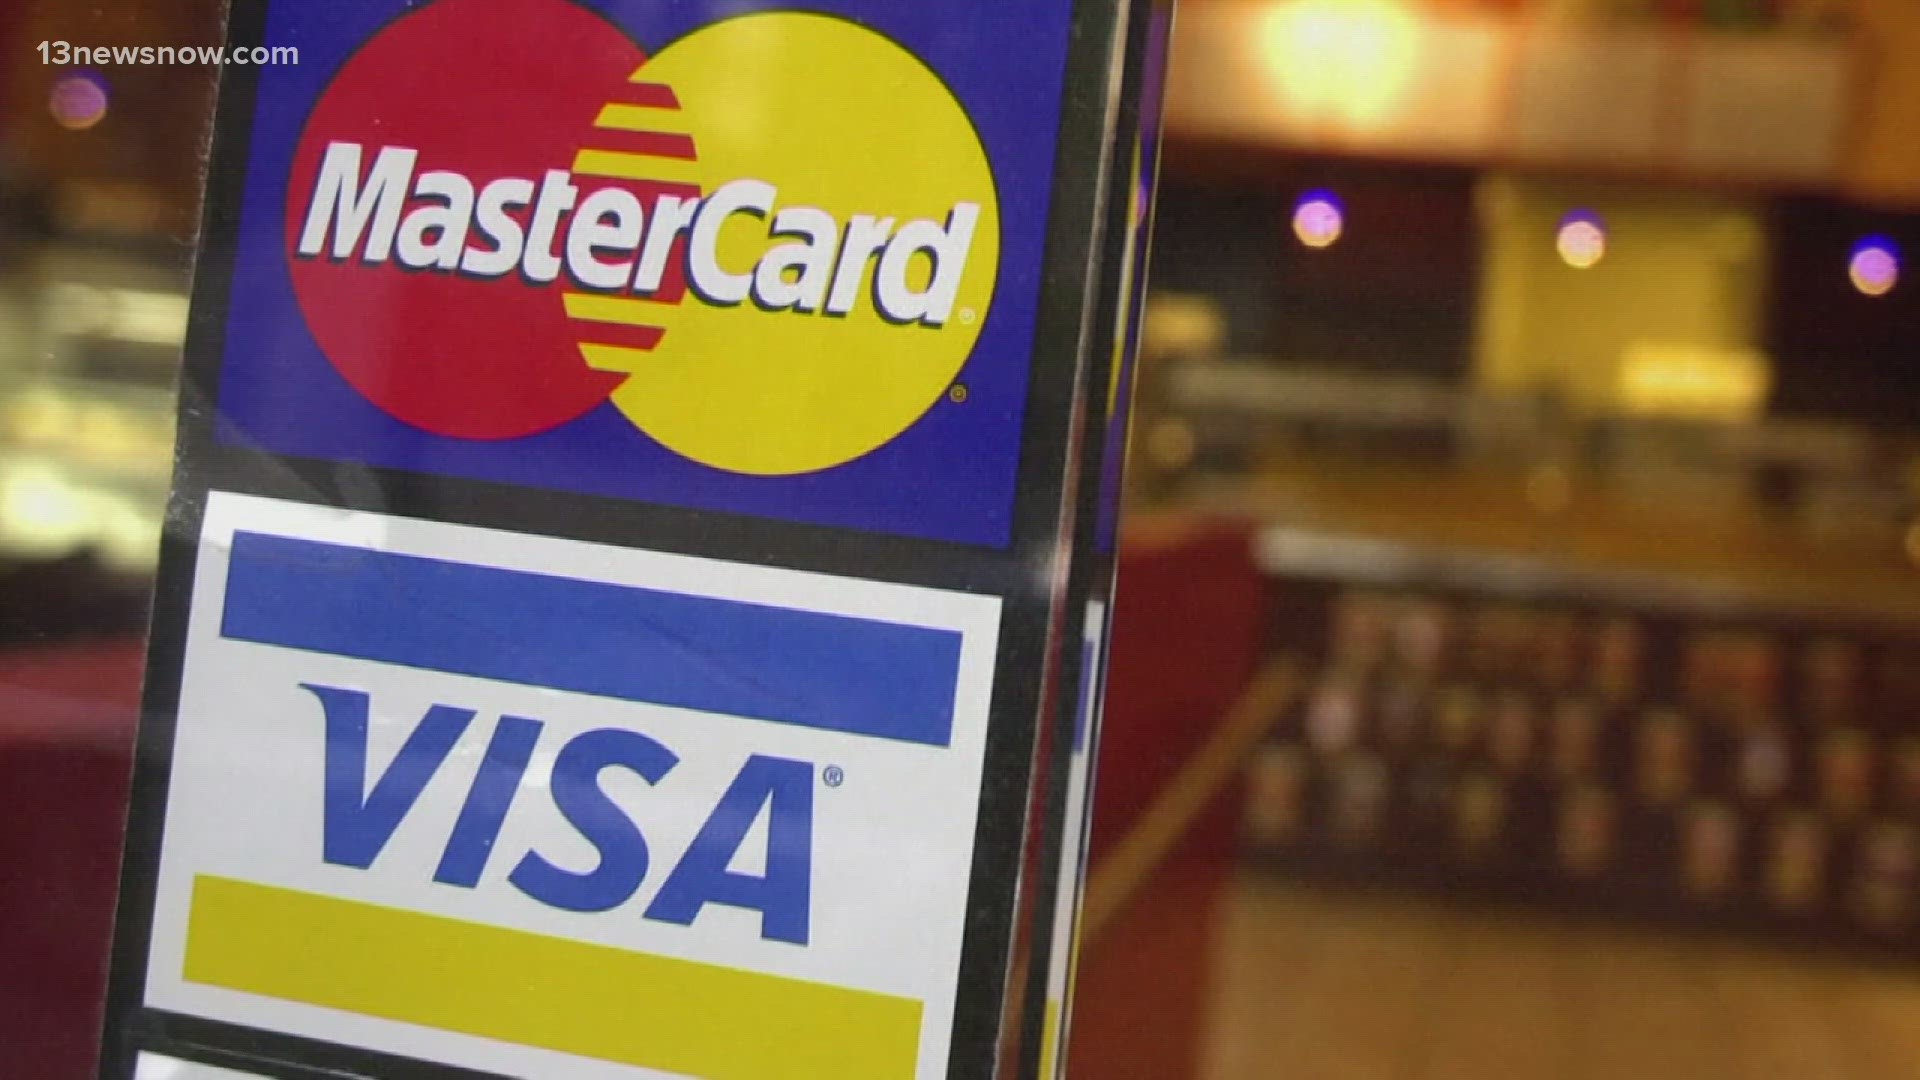 Paying with a credit card could soon get cheaper thanks to a historic new agreement on "swipe fees."